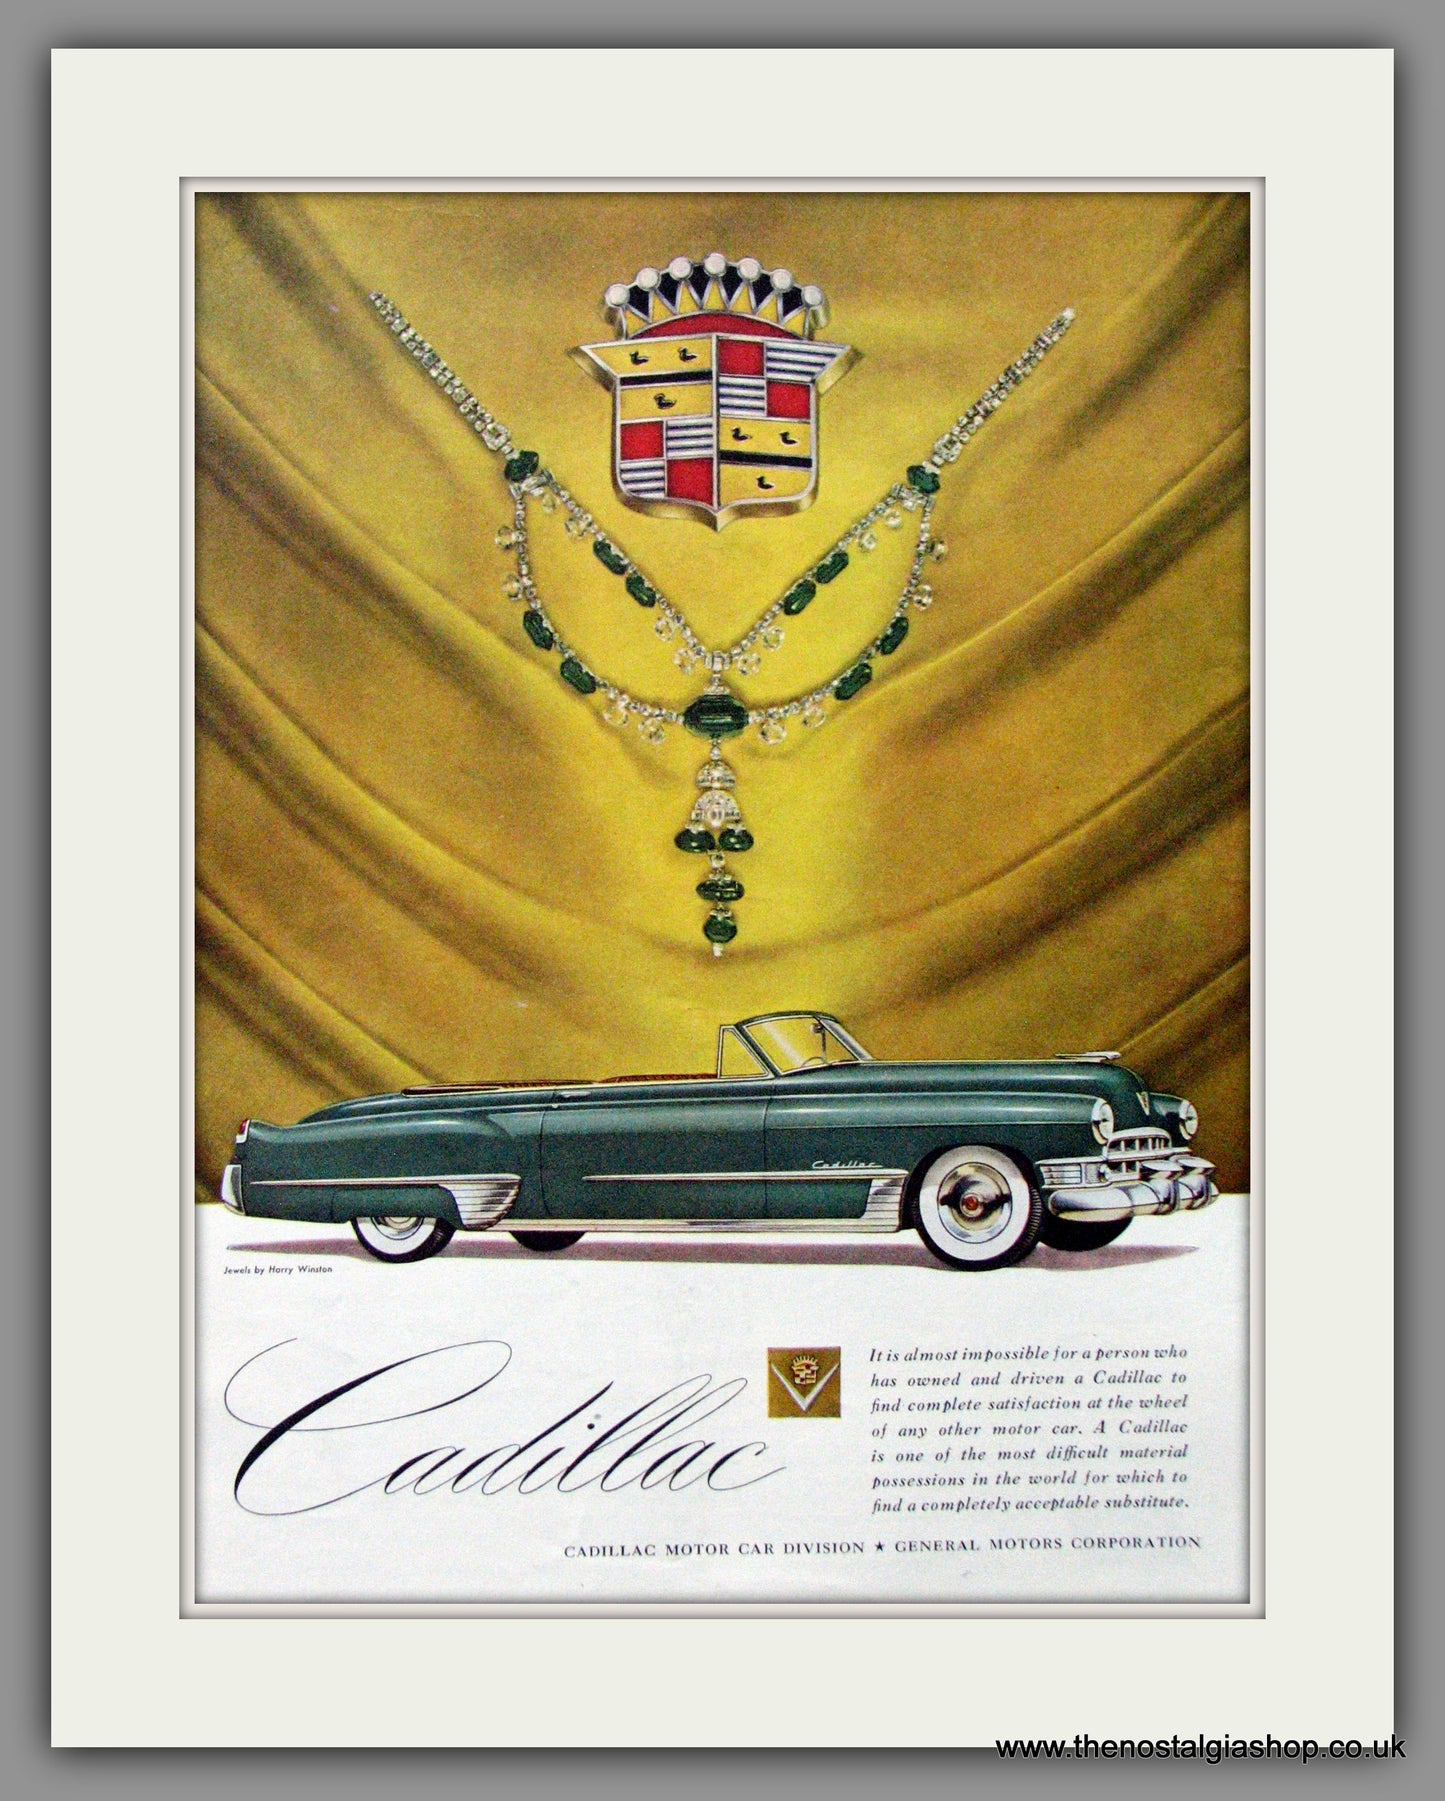 Cadillac 1949 with Jewels by Harry Winston. Original American Advert (ref AD52199)